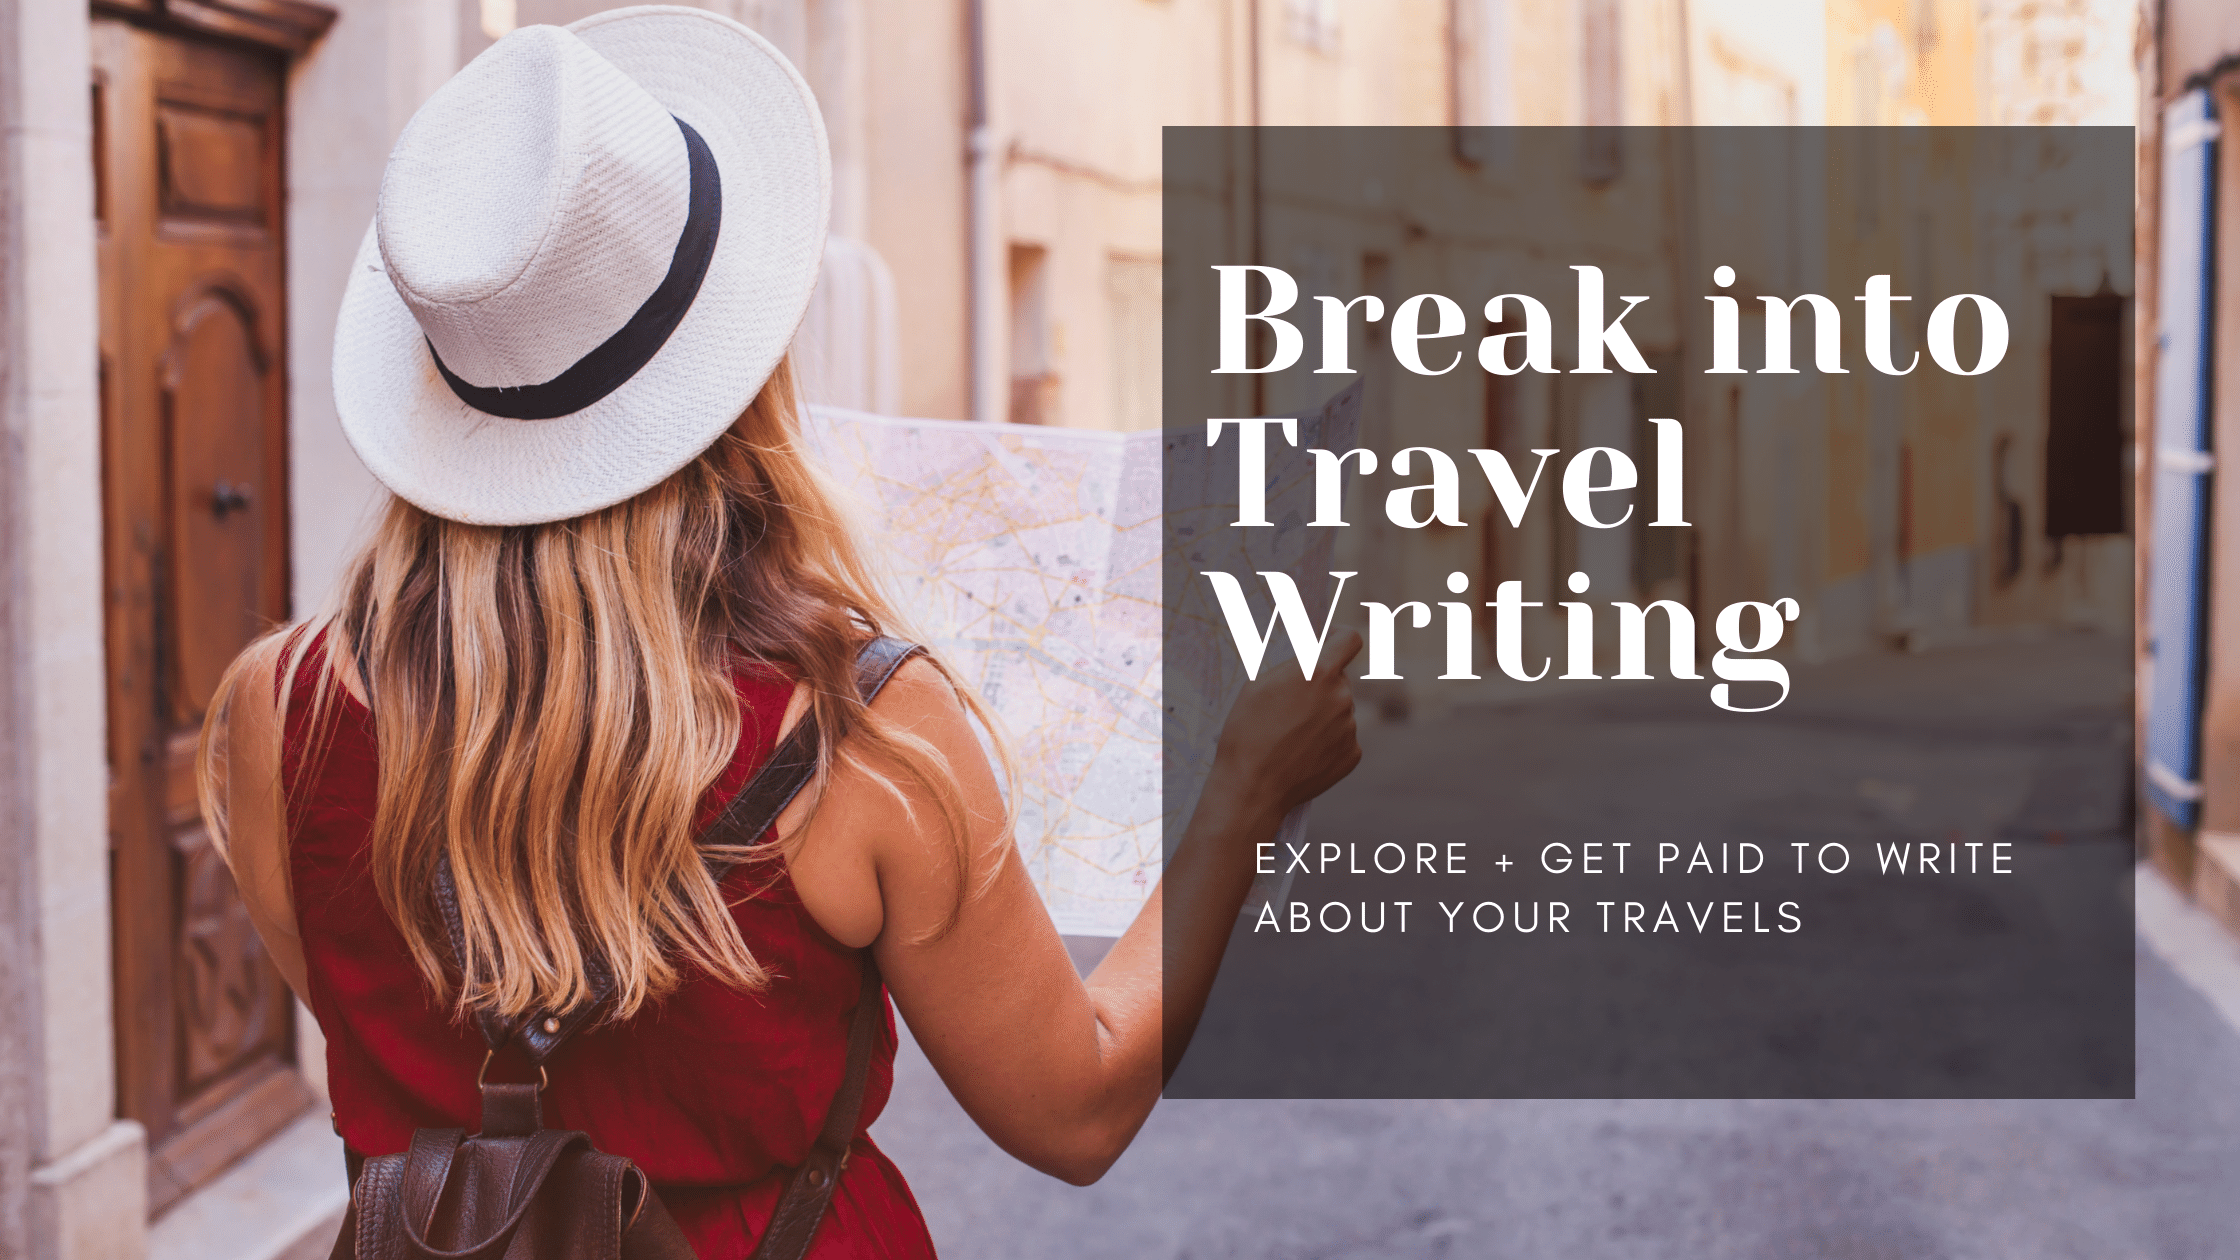 Break into travel wriring.  Explore + get paid to write about your travels